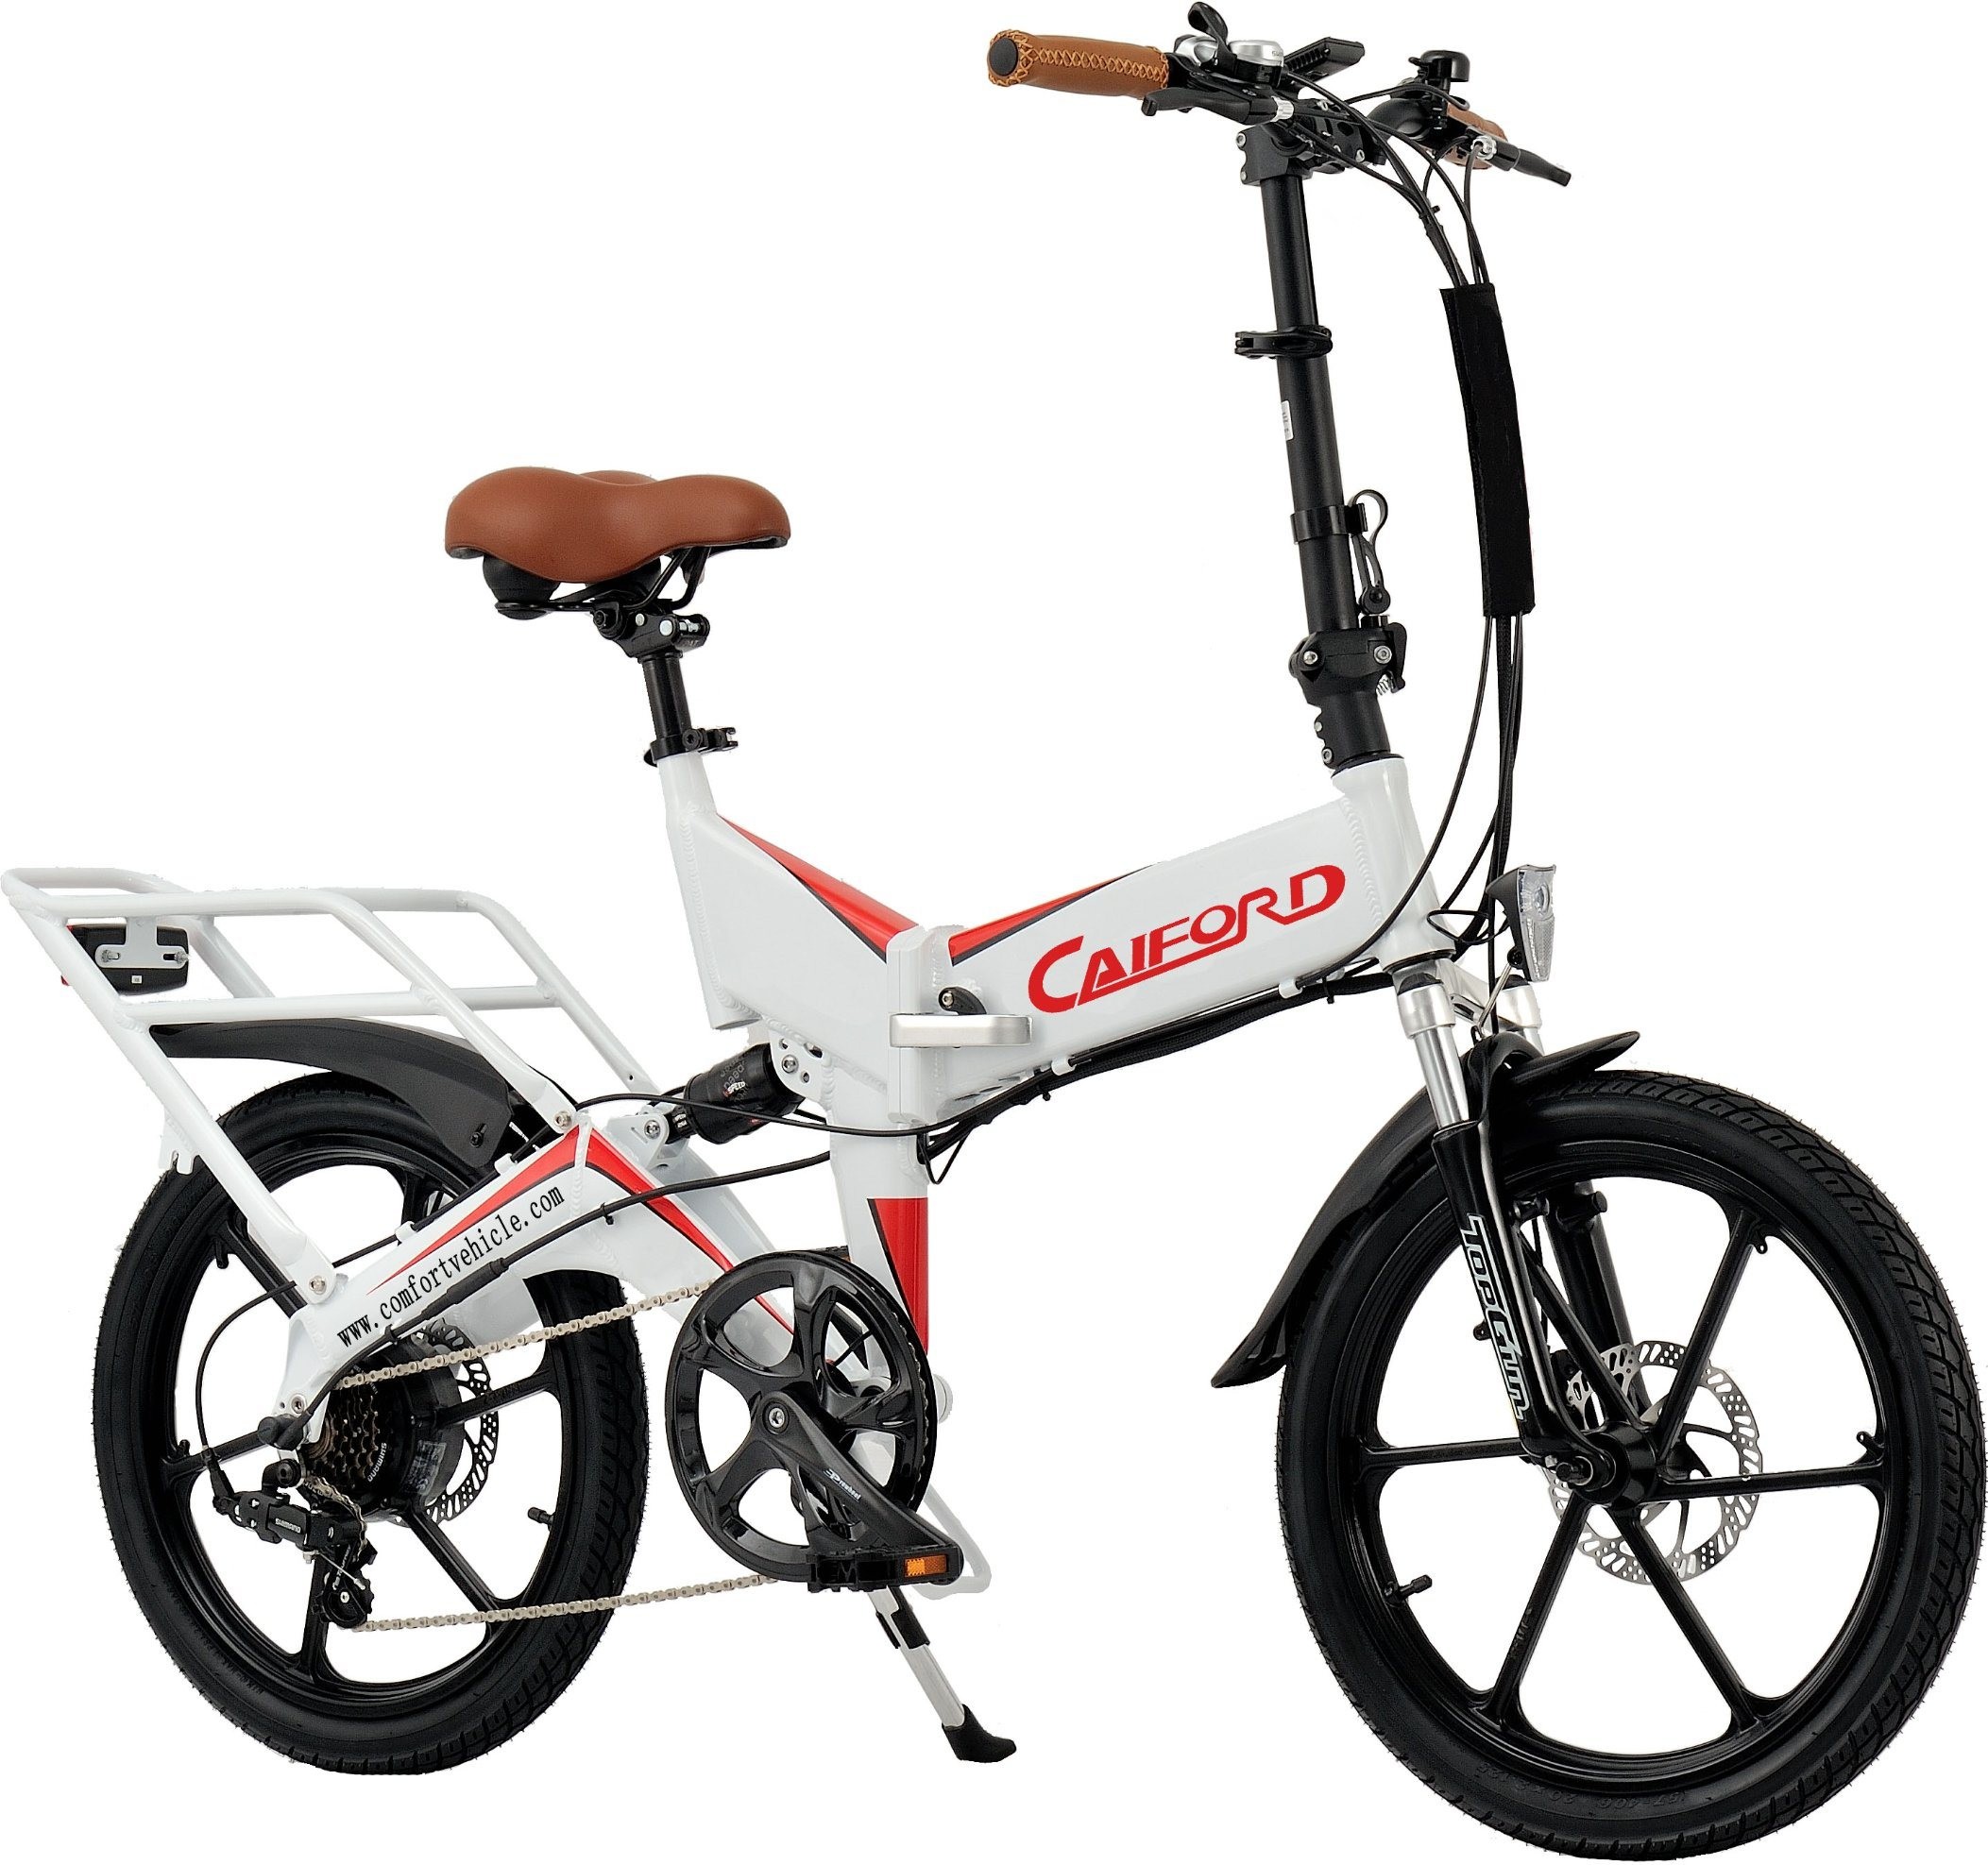 Small Size 20inch Bike 350W Fastest Folding Electric Moped Sepeda Listrik Electric Bicycle Mini LCD Display 2seat for Children